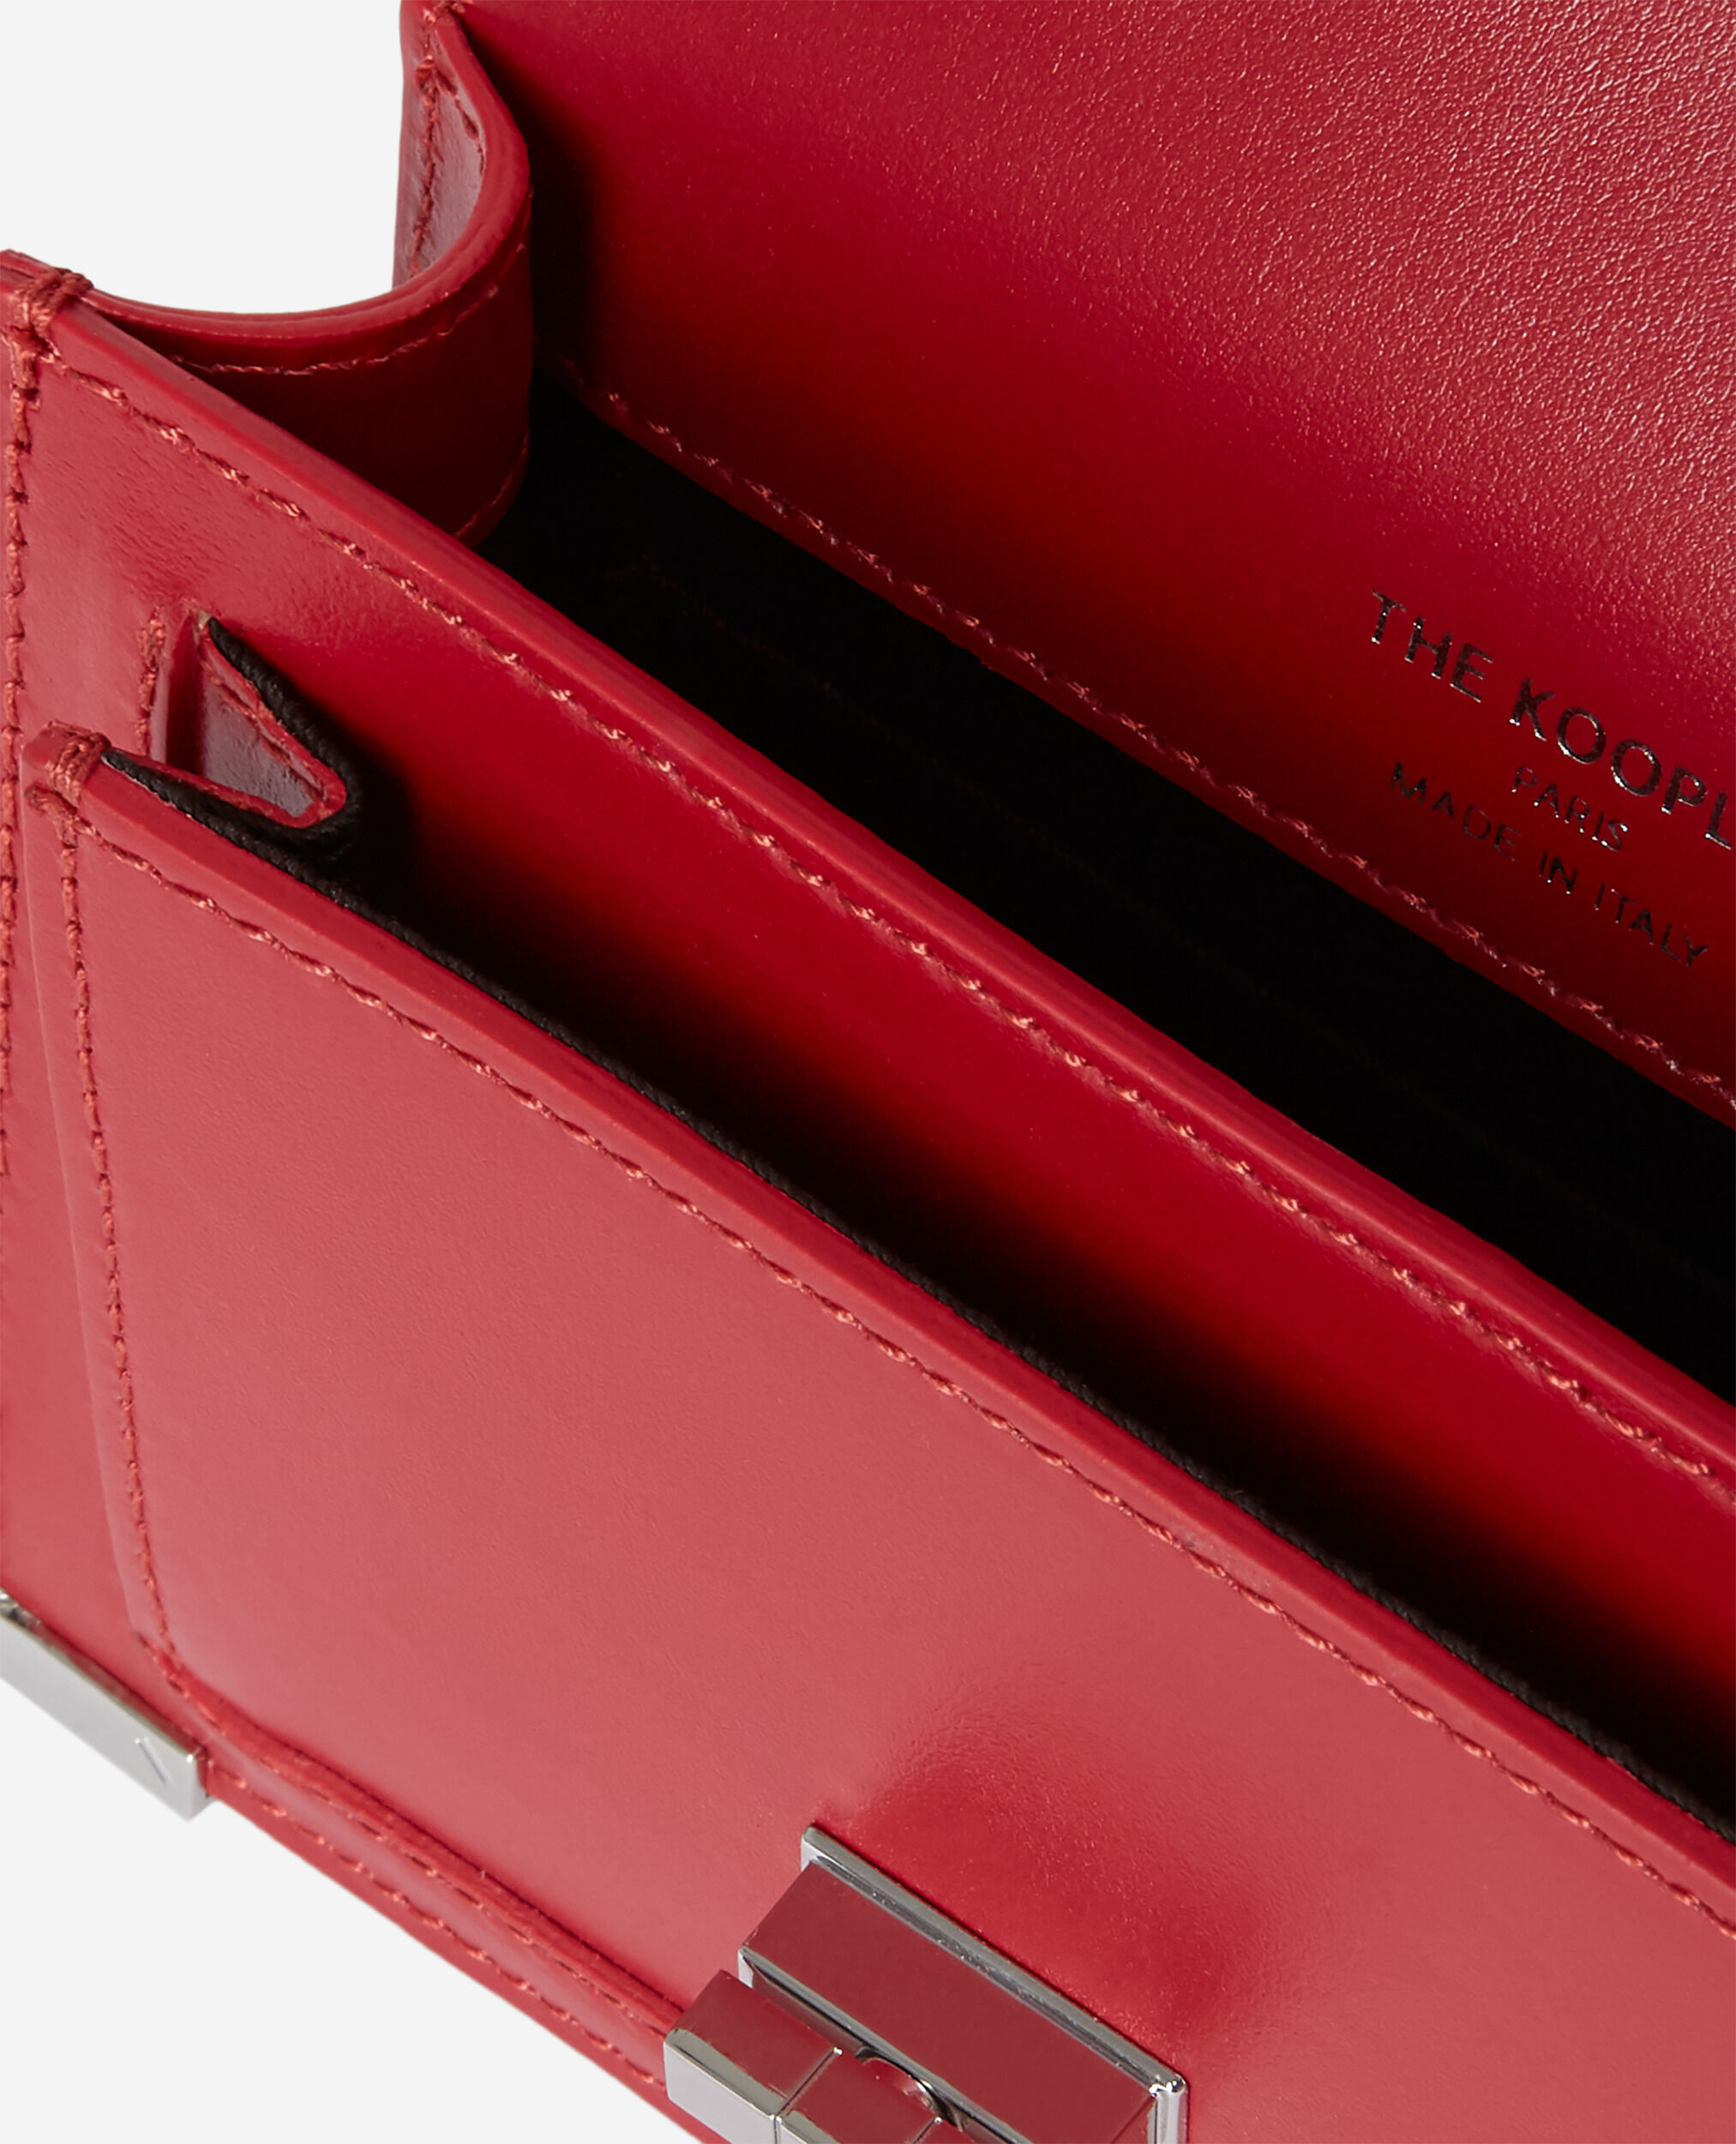 Nano Emily bag in red leather, DARK CHERRY, hi-res image number null